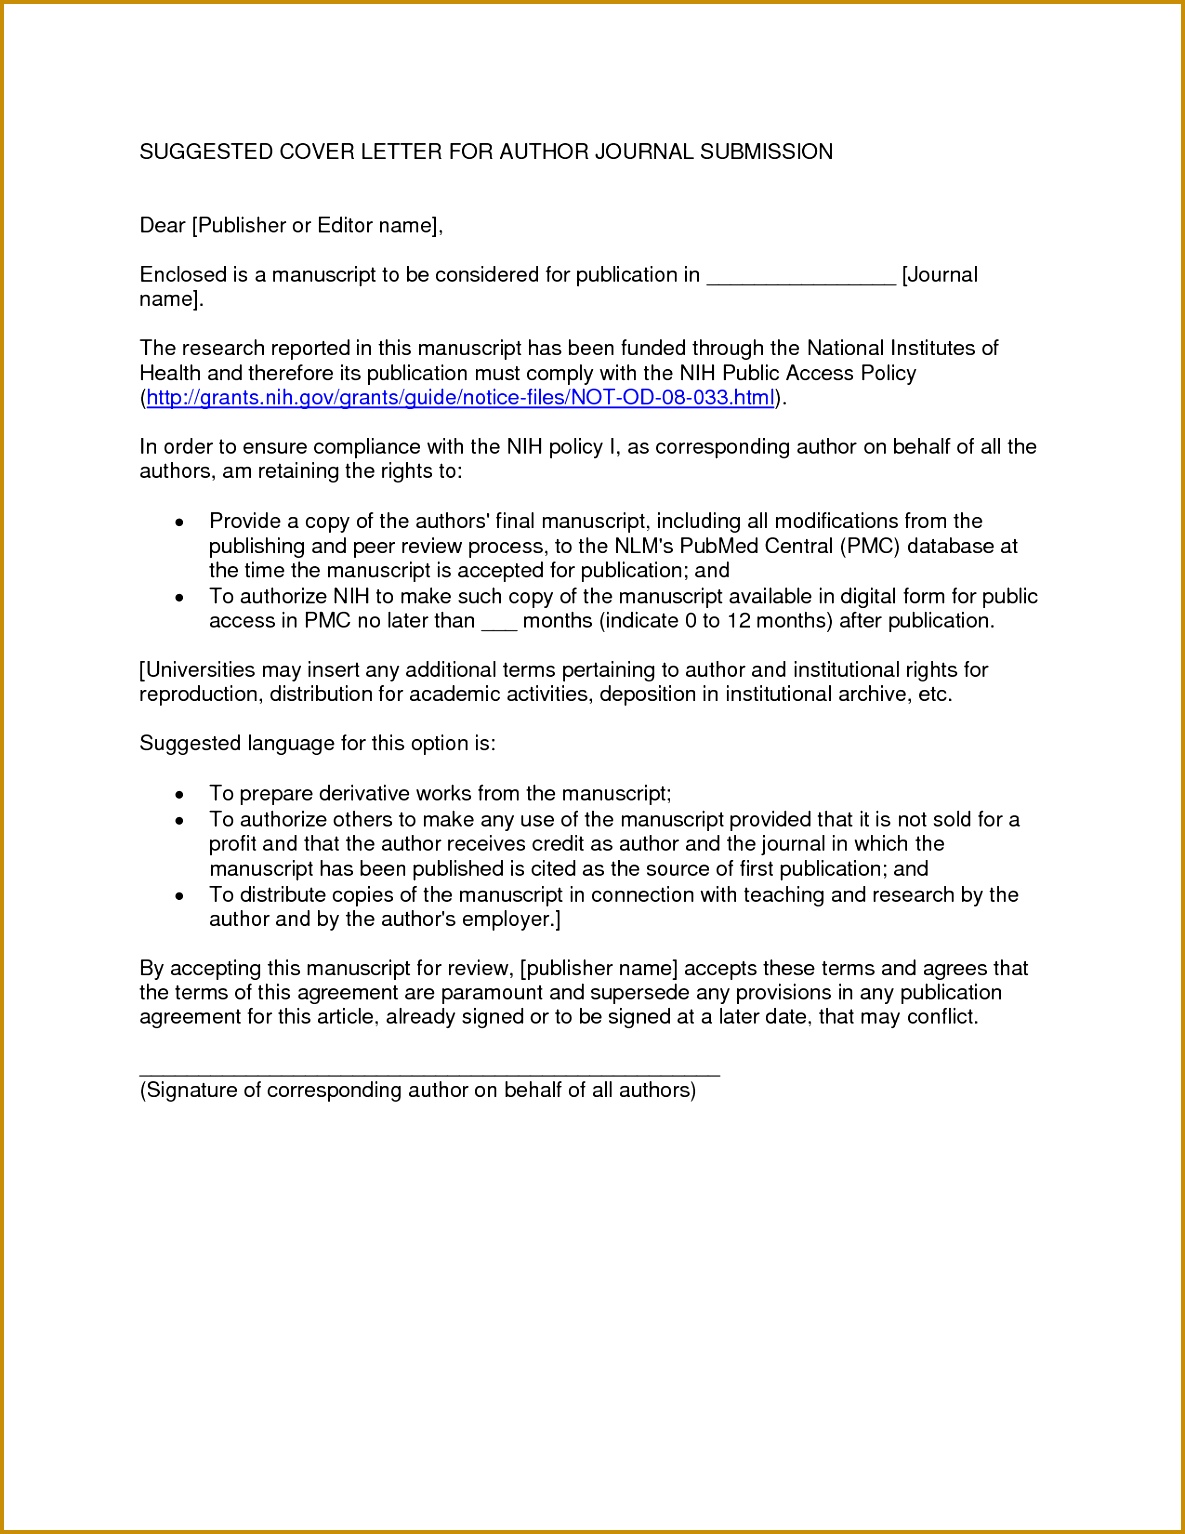 Elegant Cover Letter To Editor Scientific Journal Sample 16 With Additional Cover Letter Samples For Receptionist Administrative Assistant with Cover Letter 15341185